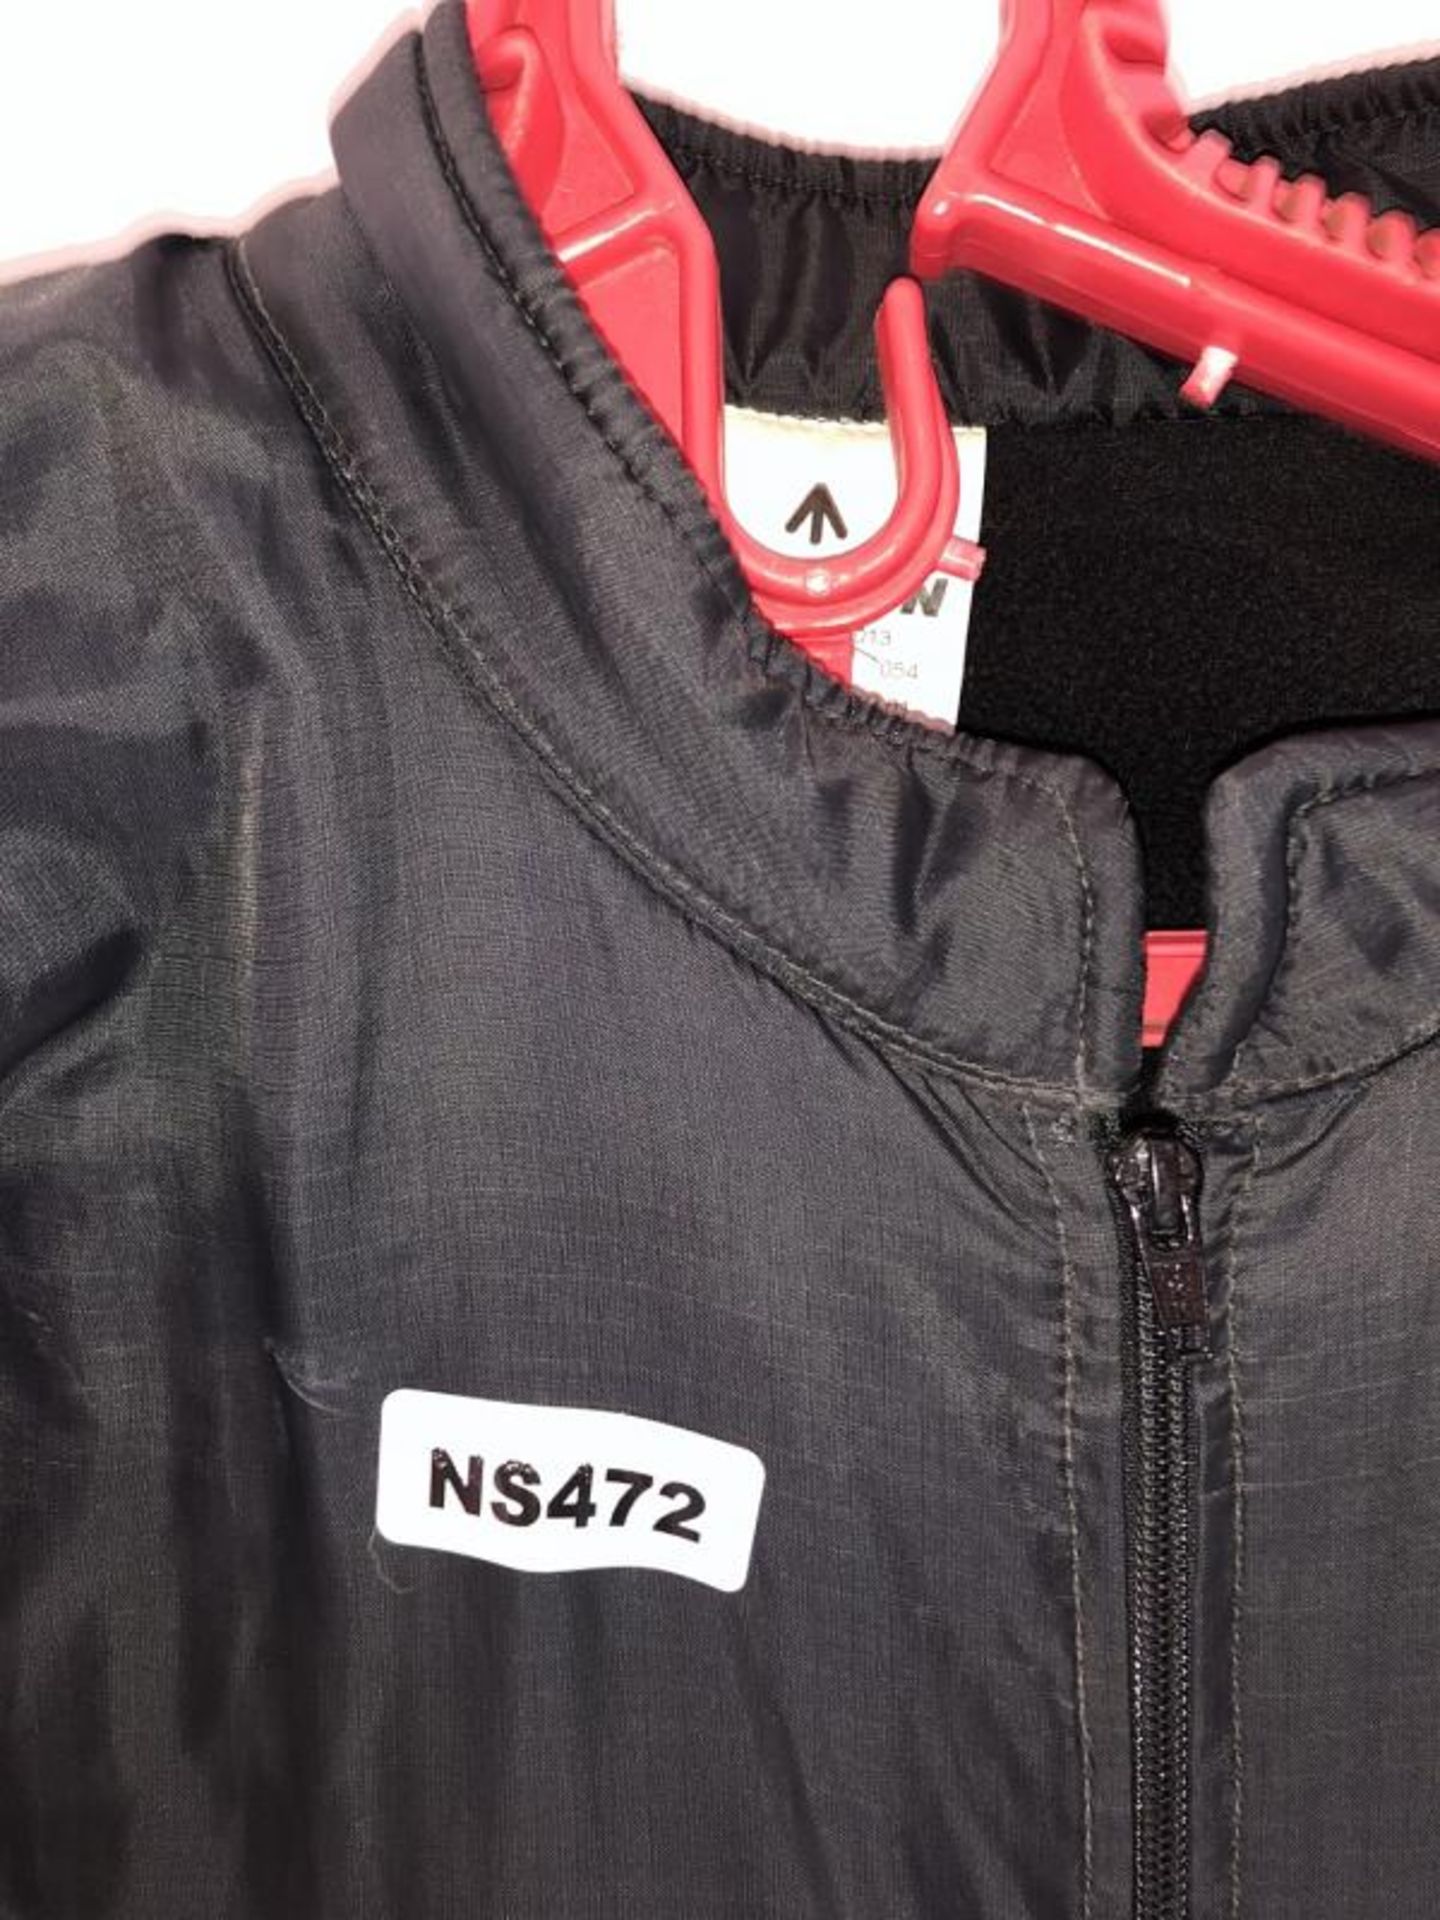 1 x Adults Small Black Typhoon Wetsuit - Ref: NS472 - CL349 - Location: Altrincham WA14 - Image 5 of 5